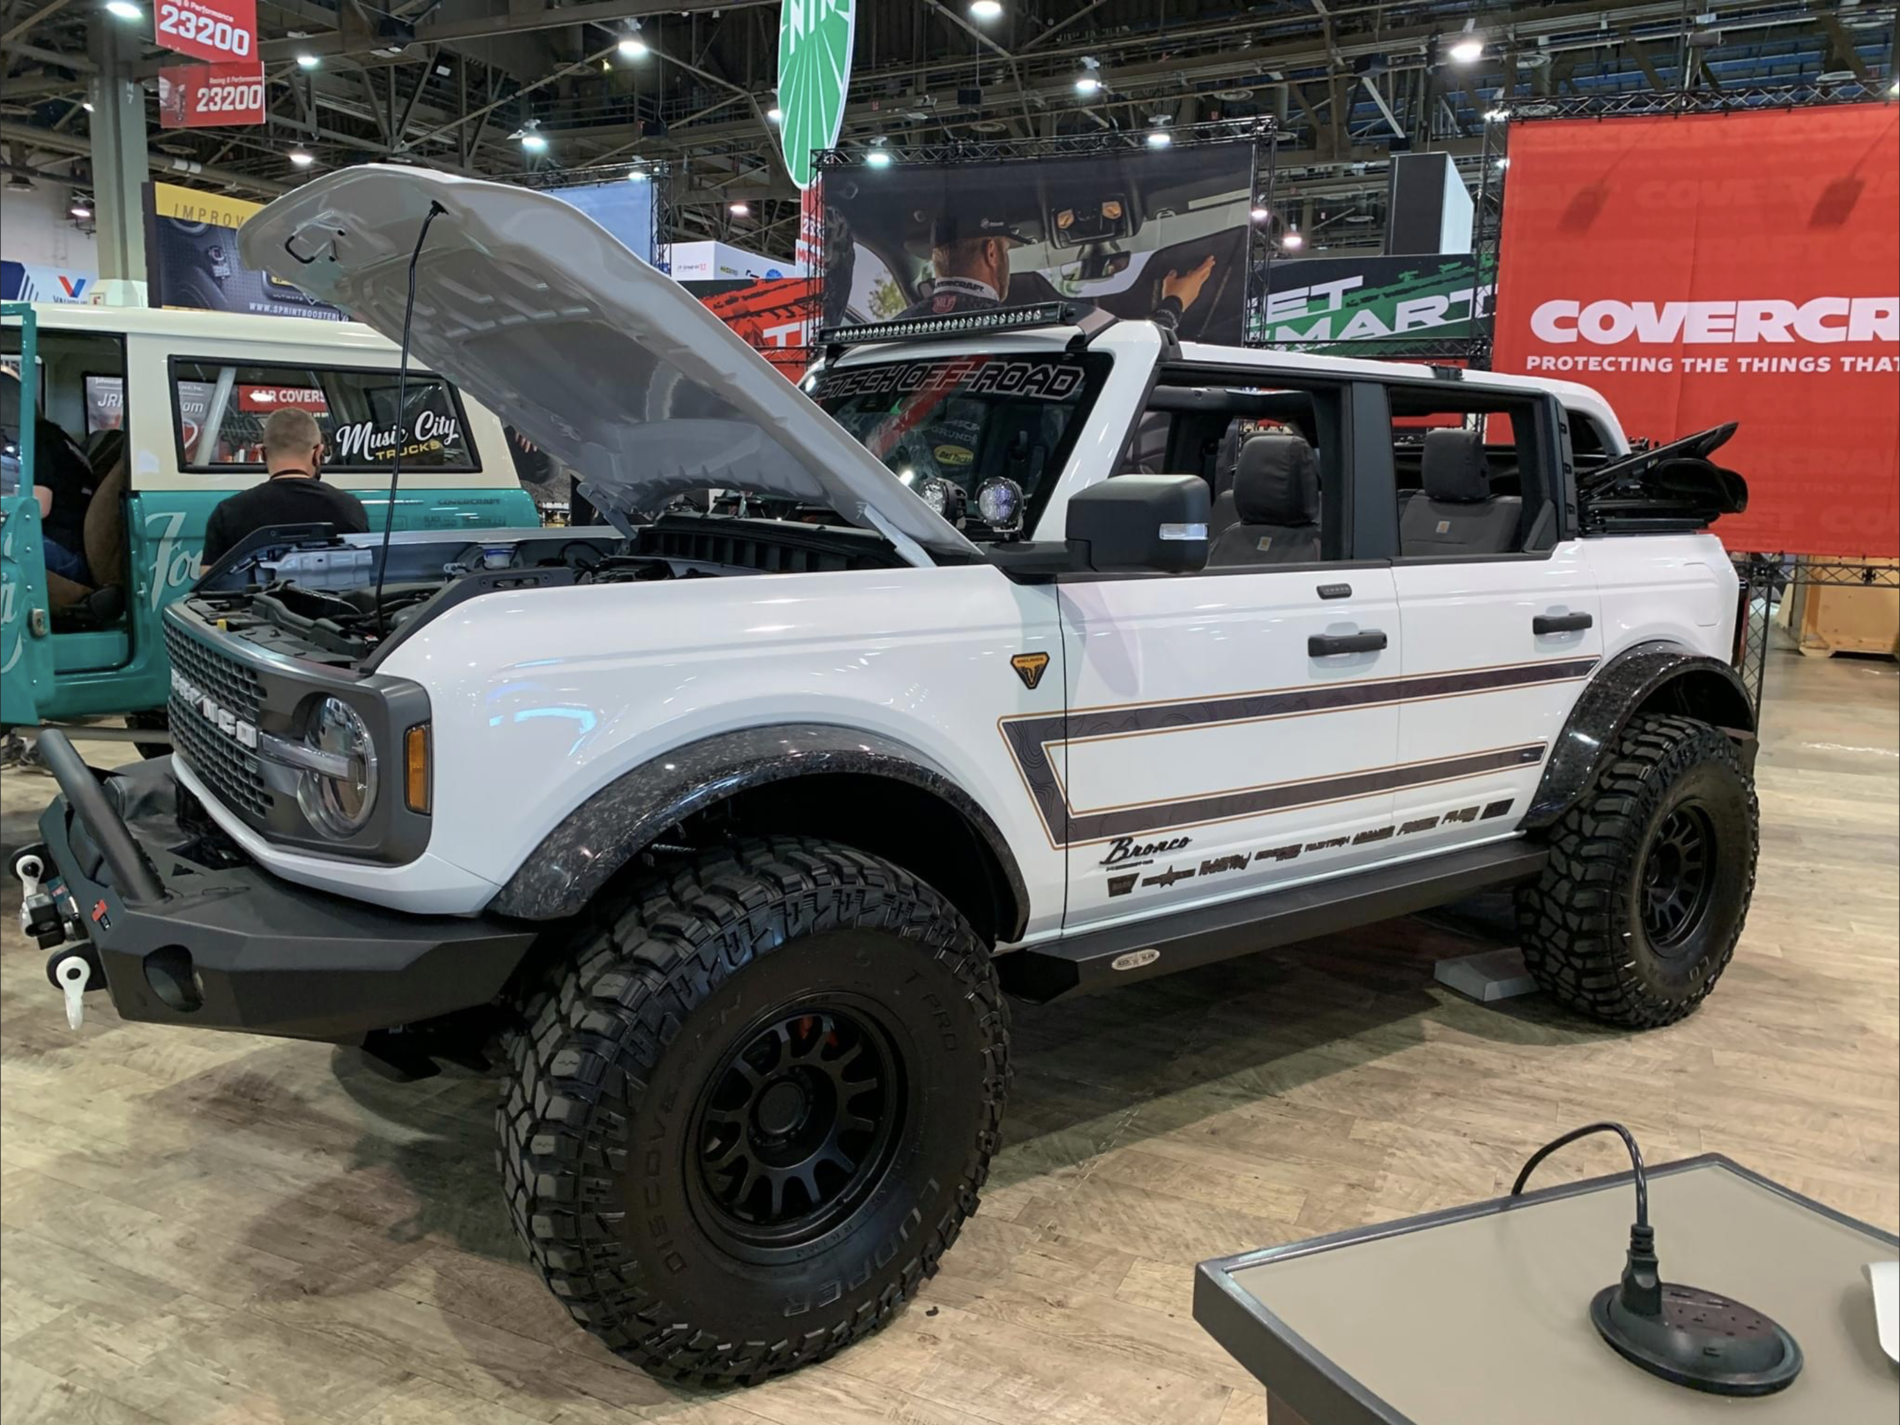 Ford Bronco Pics of (almost) all the SEMA Broncos In One Thread 800A5C3B-8F53-4FA8-A8C4-83C629014825